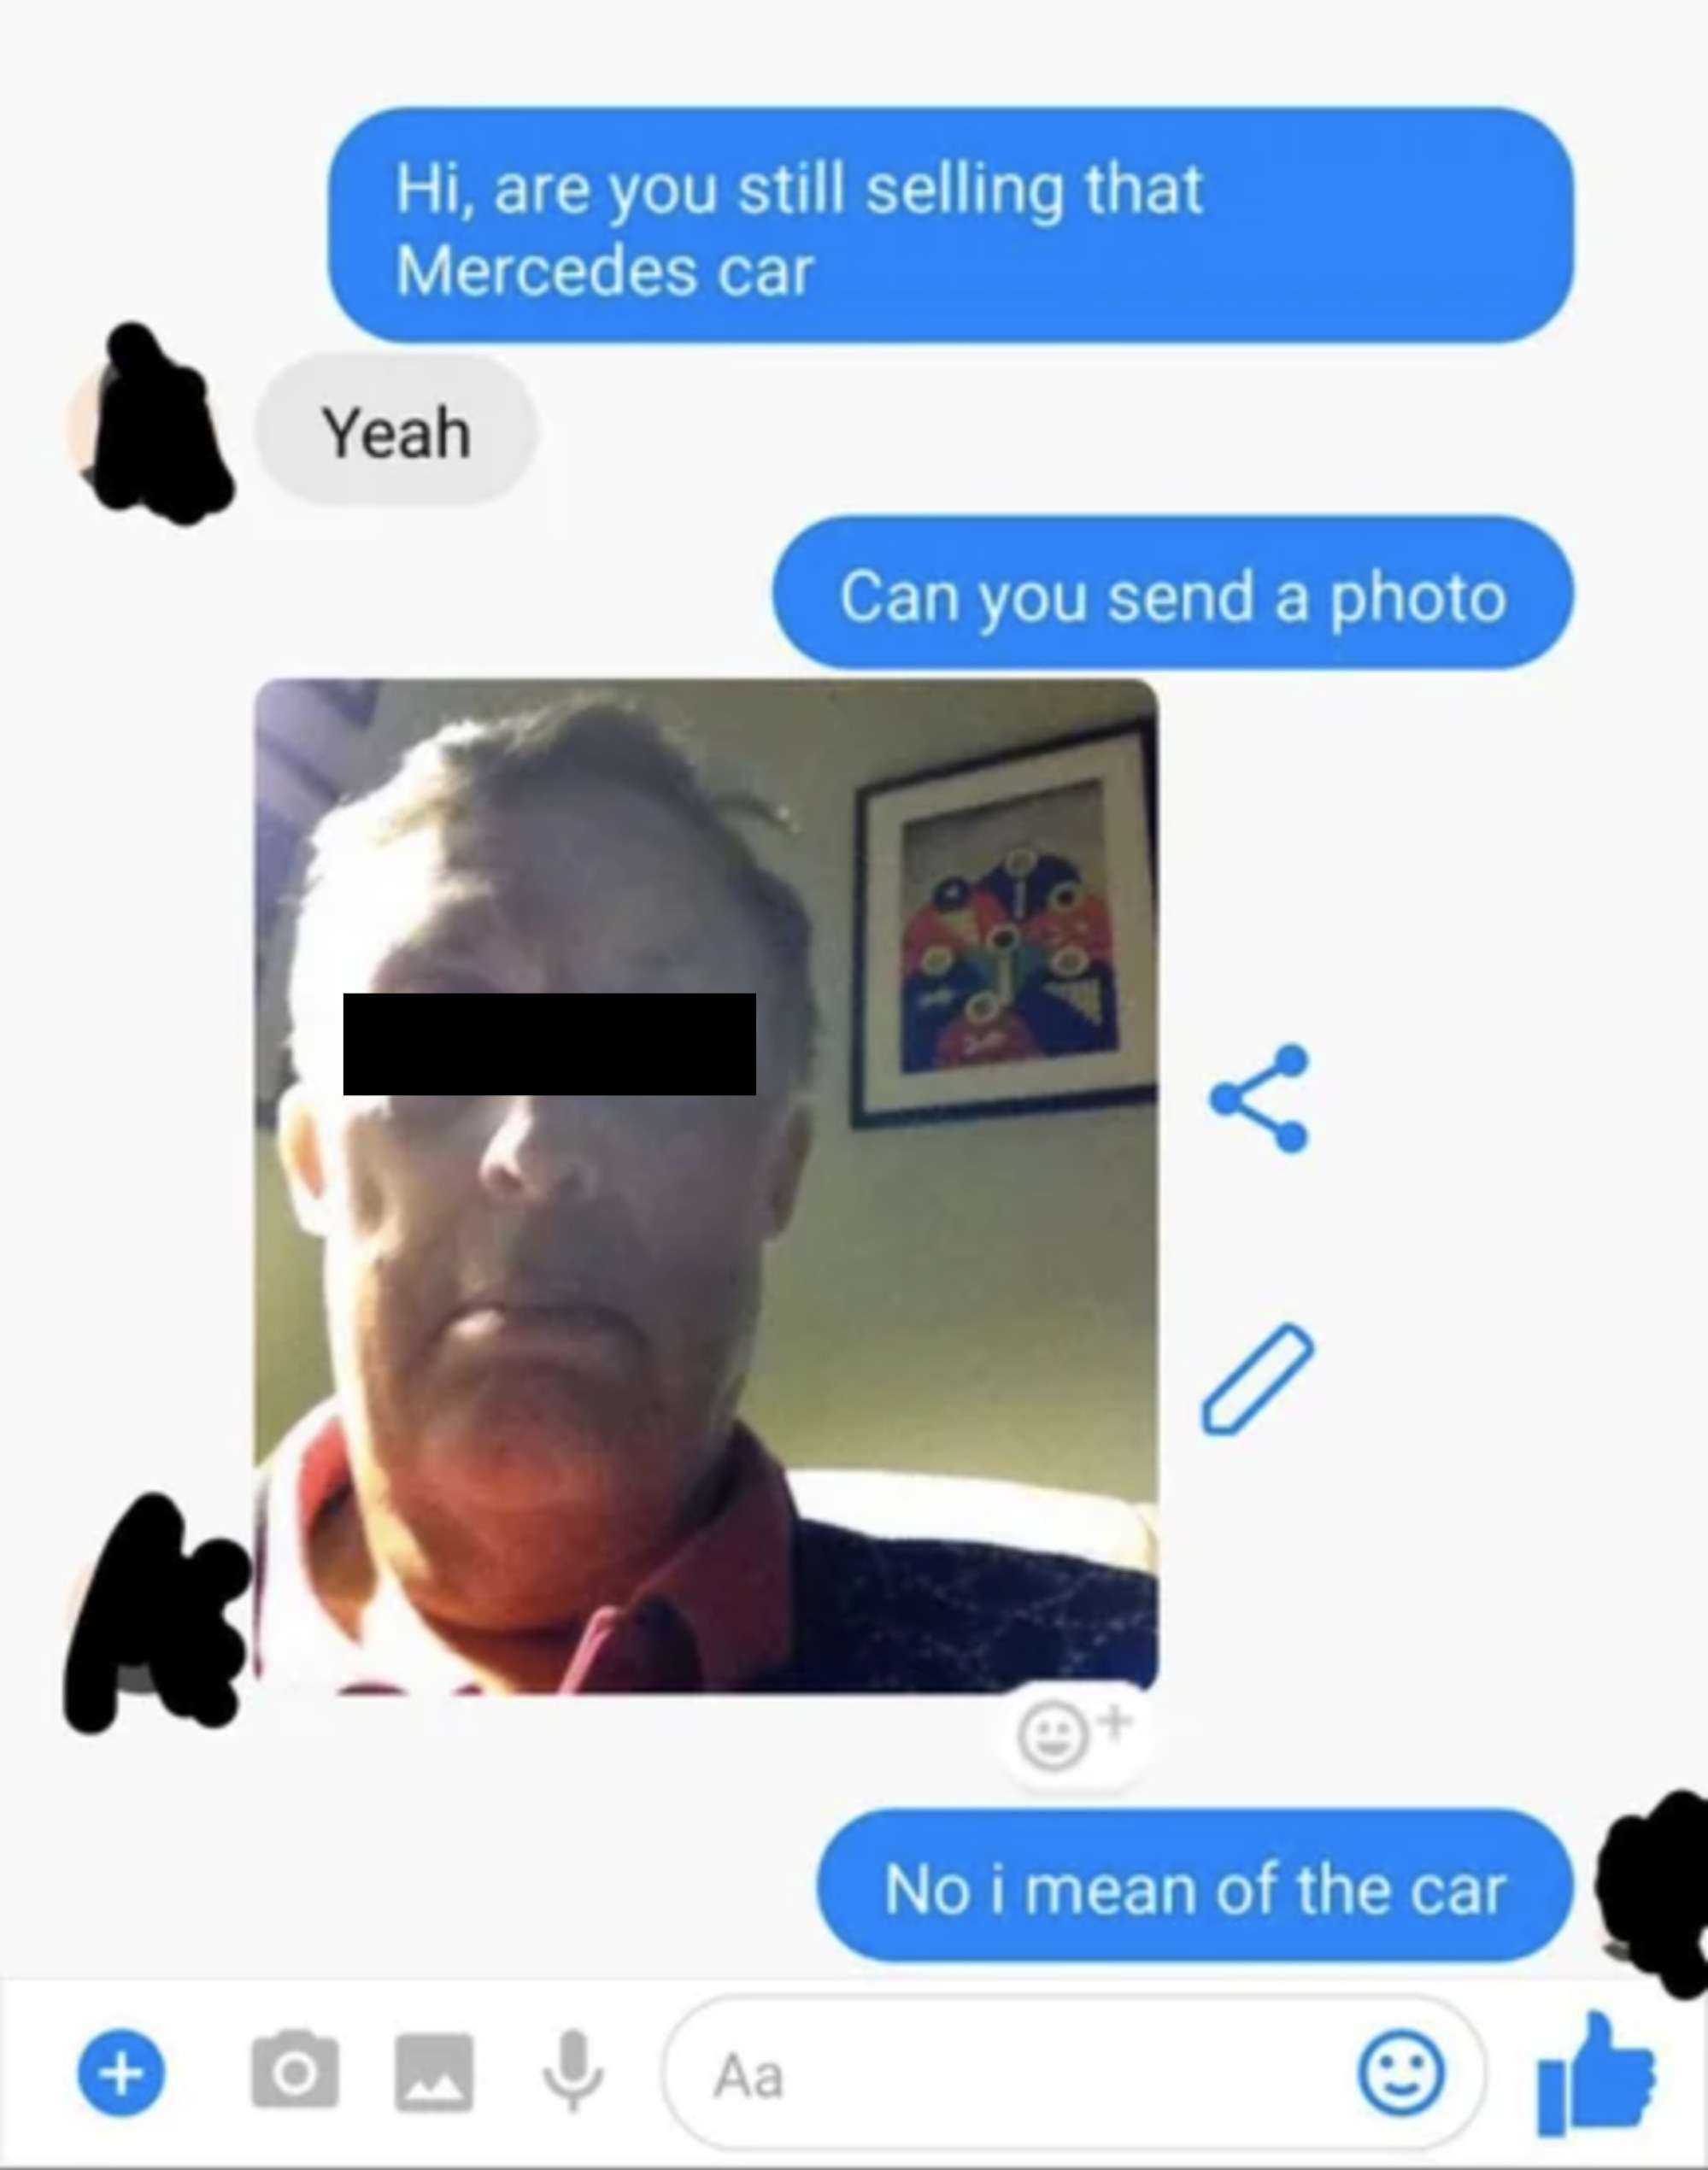 person asking for a photo of an item for sale and the seller sends a picture of themselves